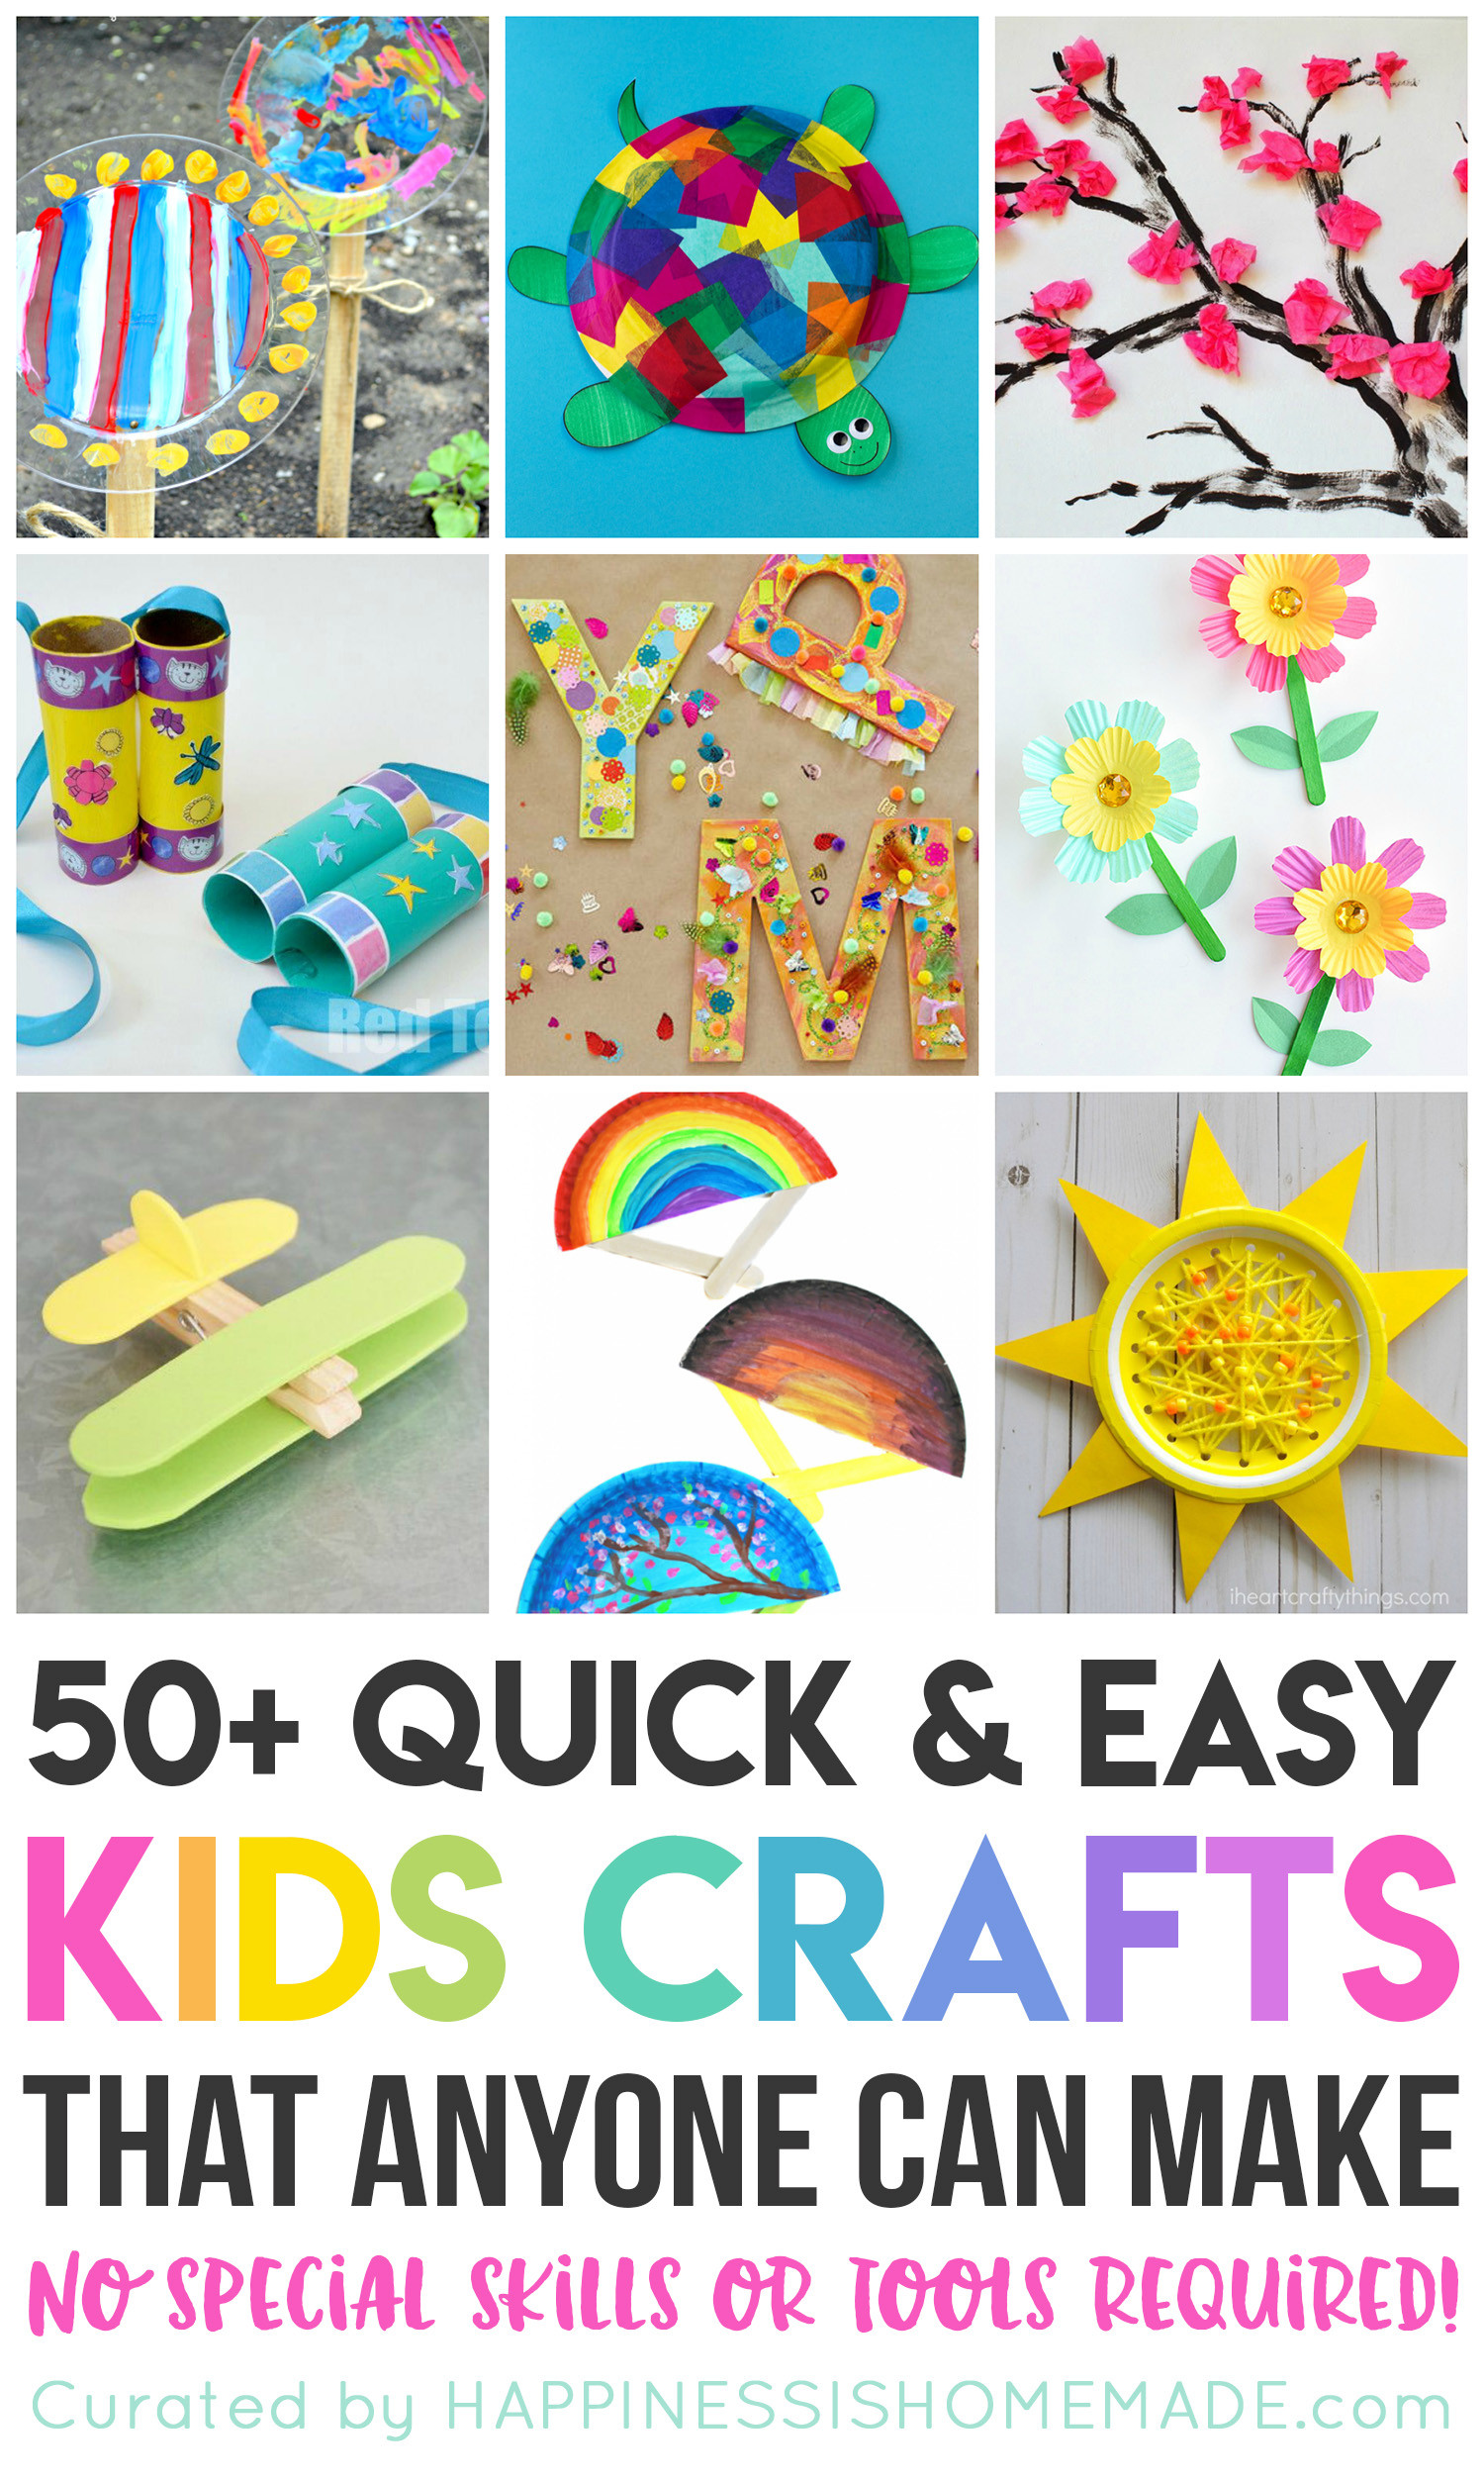 Easy Crafts For Preschoolers
 50 Quick & Easy Kids Crafts that ANYONE Can Make